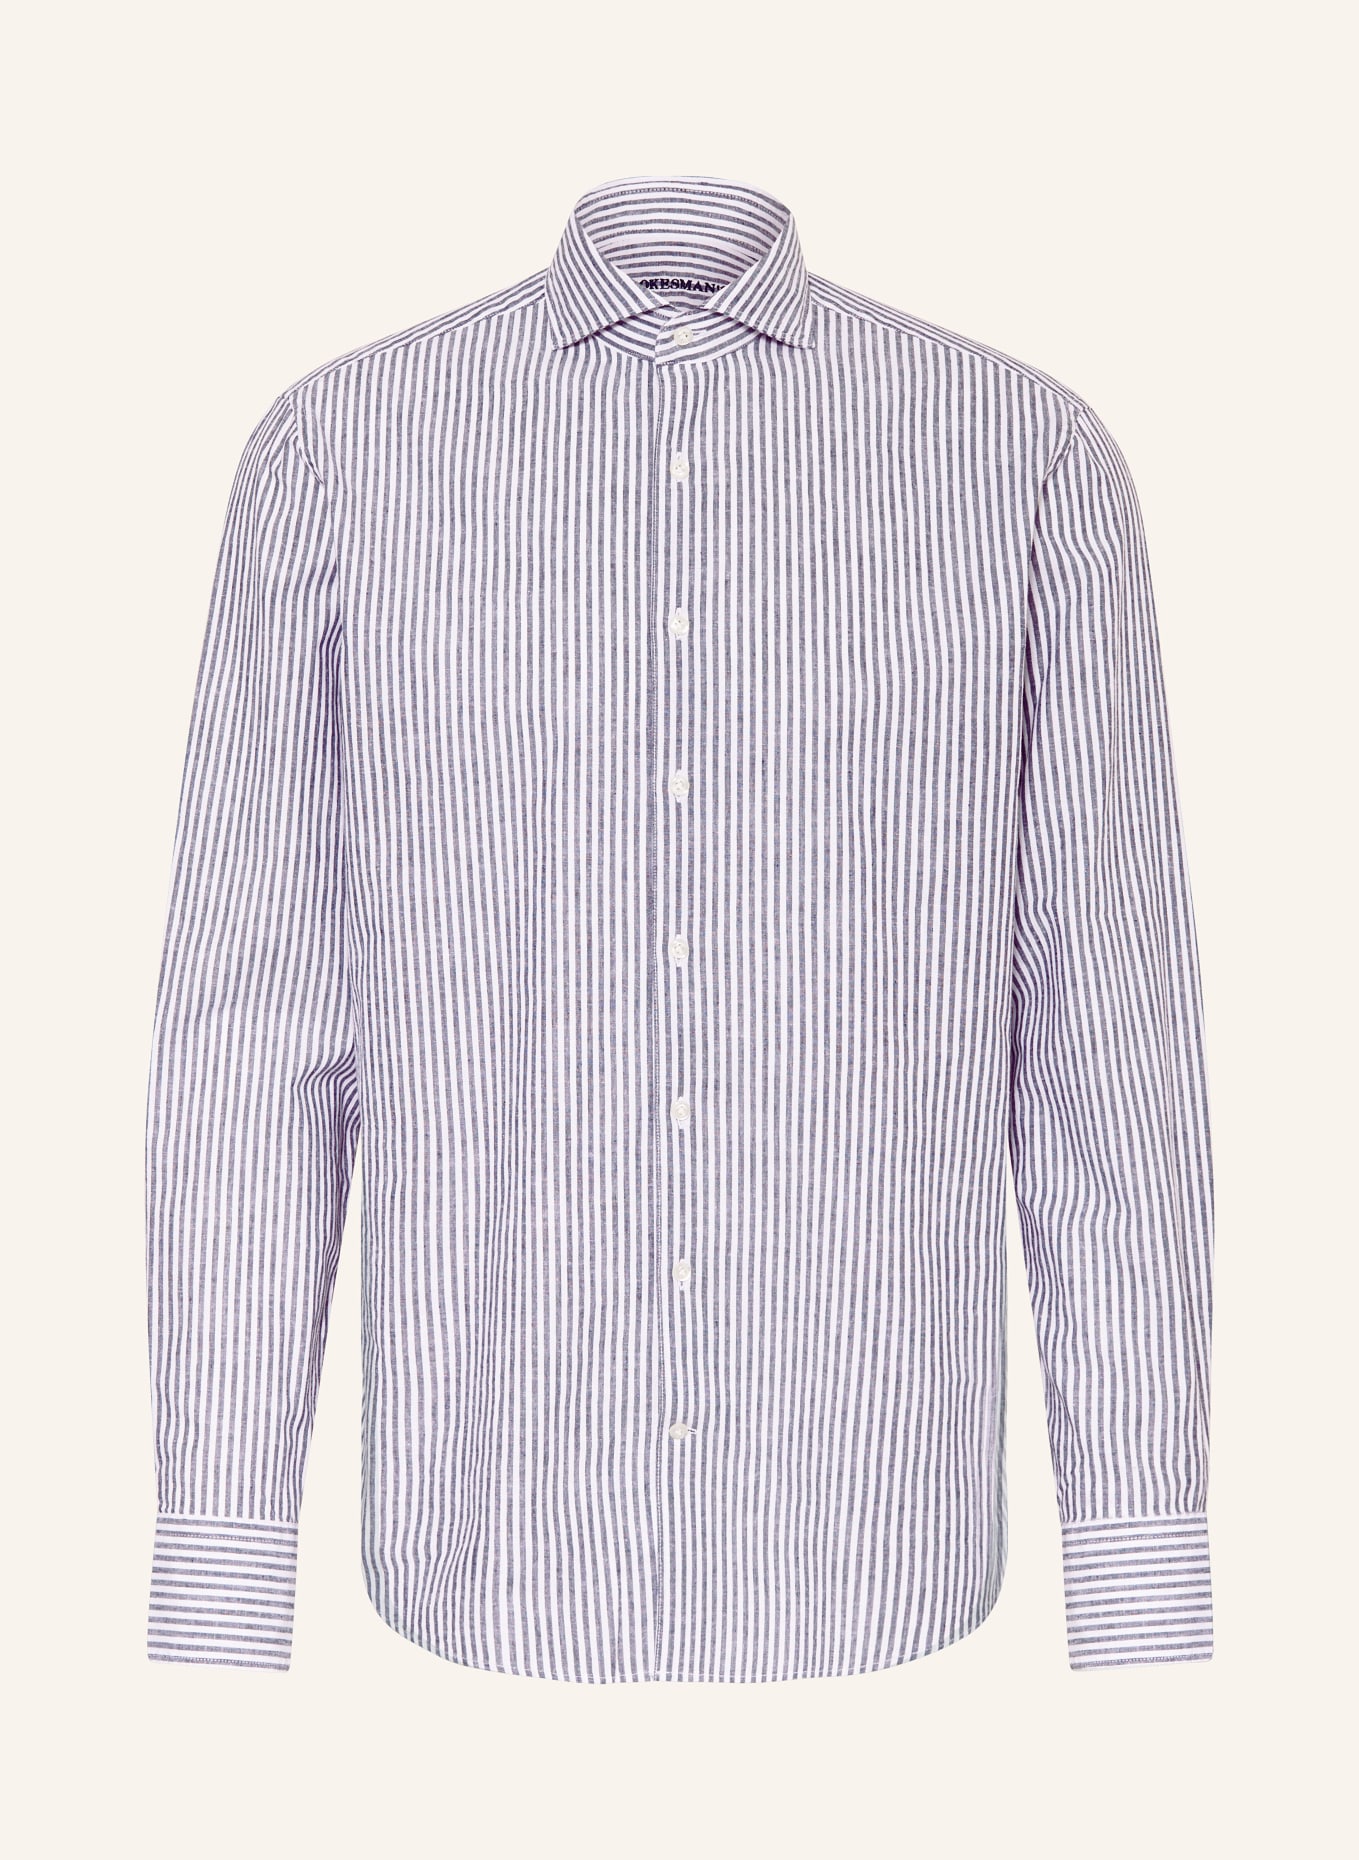 STROKESMAN'S Shirt regular fit with linen, Color: DARK BLUE/ WHITE (Image 1)